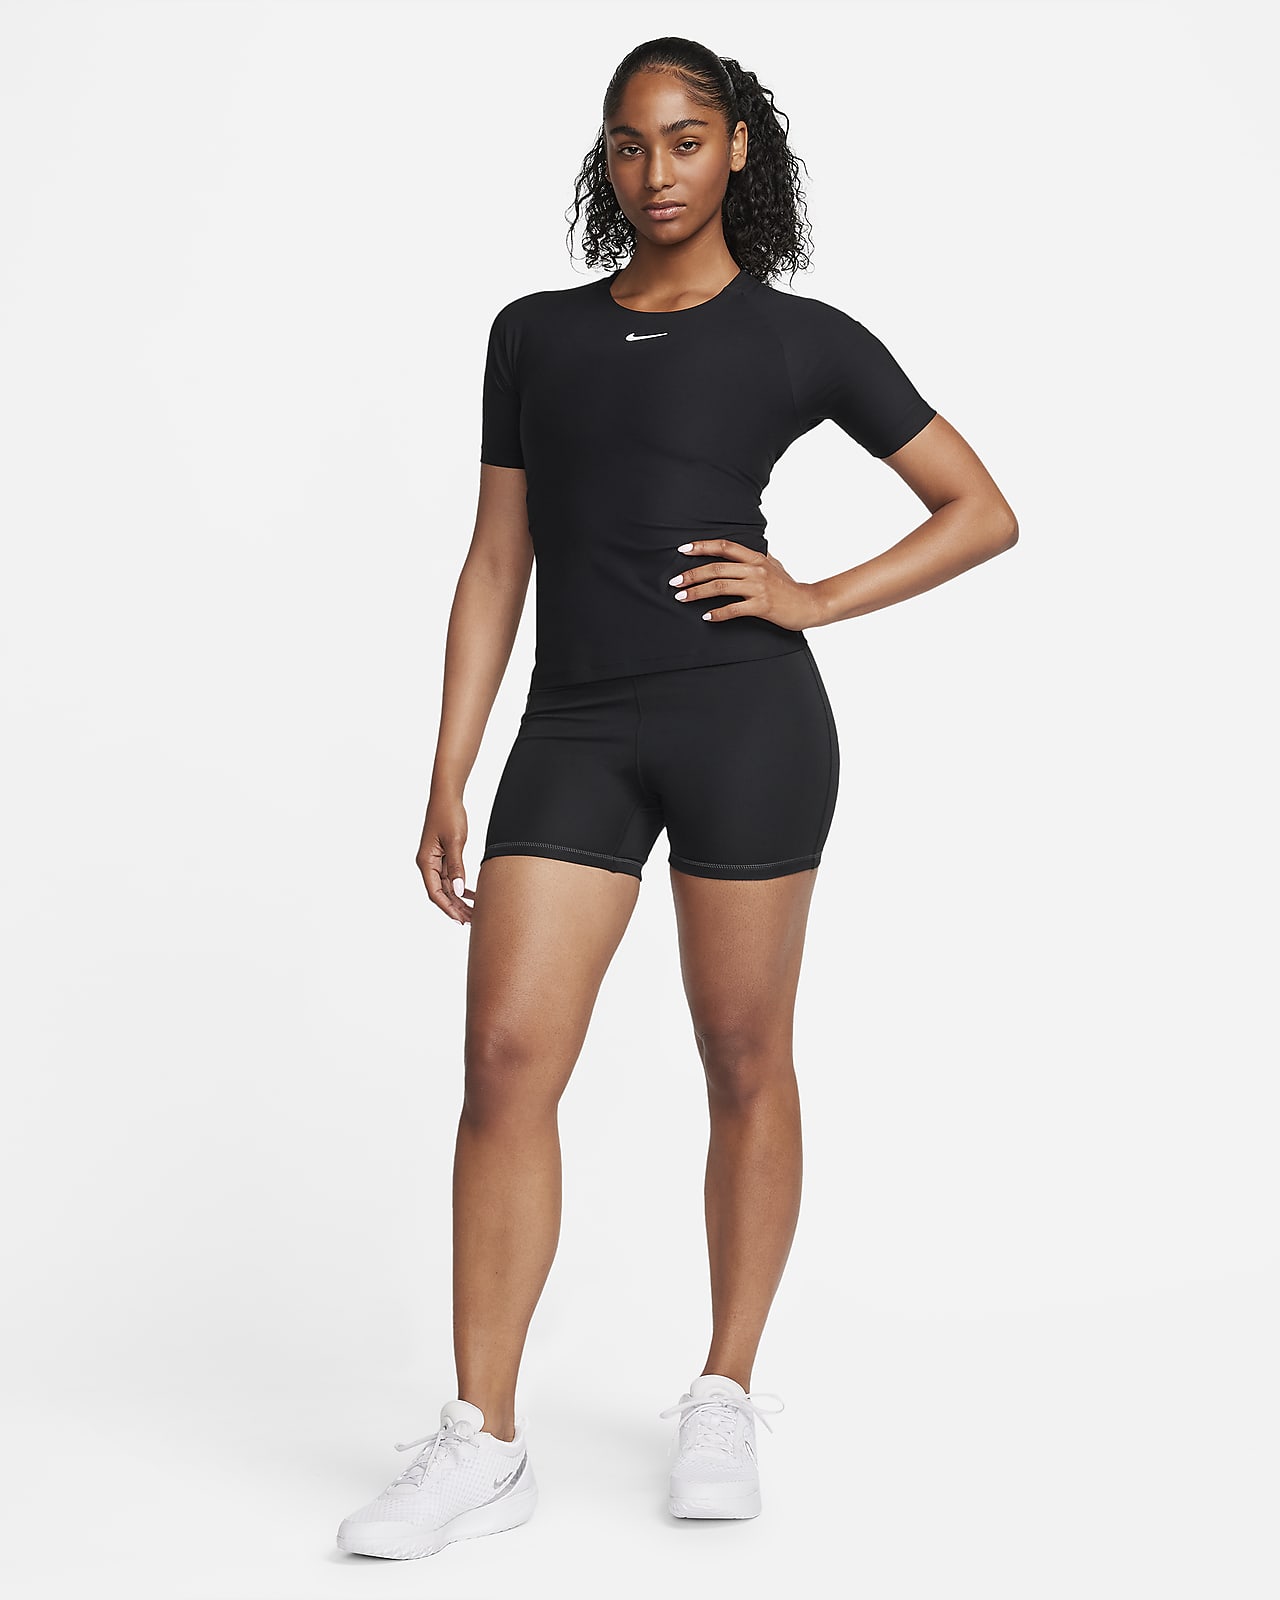 Dri-FIT with Women\'s Shorts SE Pockets. Nike High-Waisted 4\